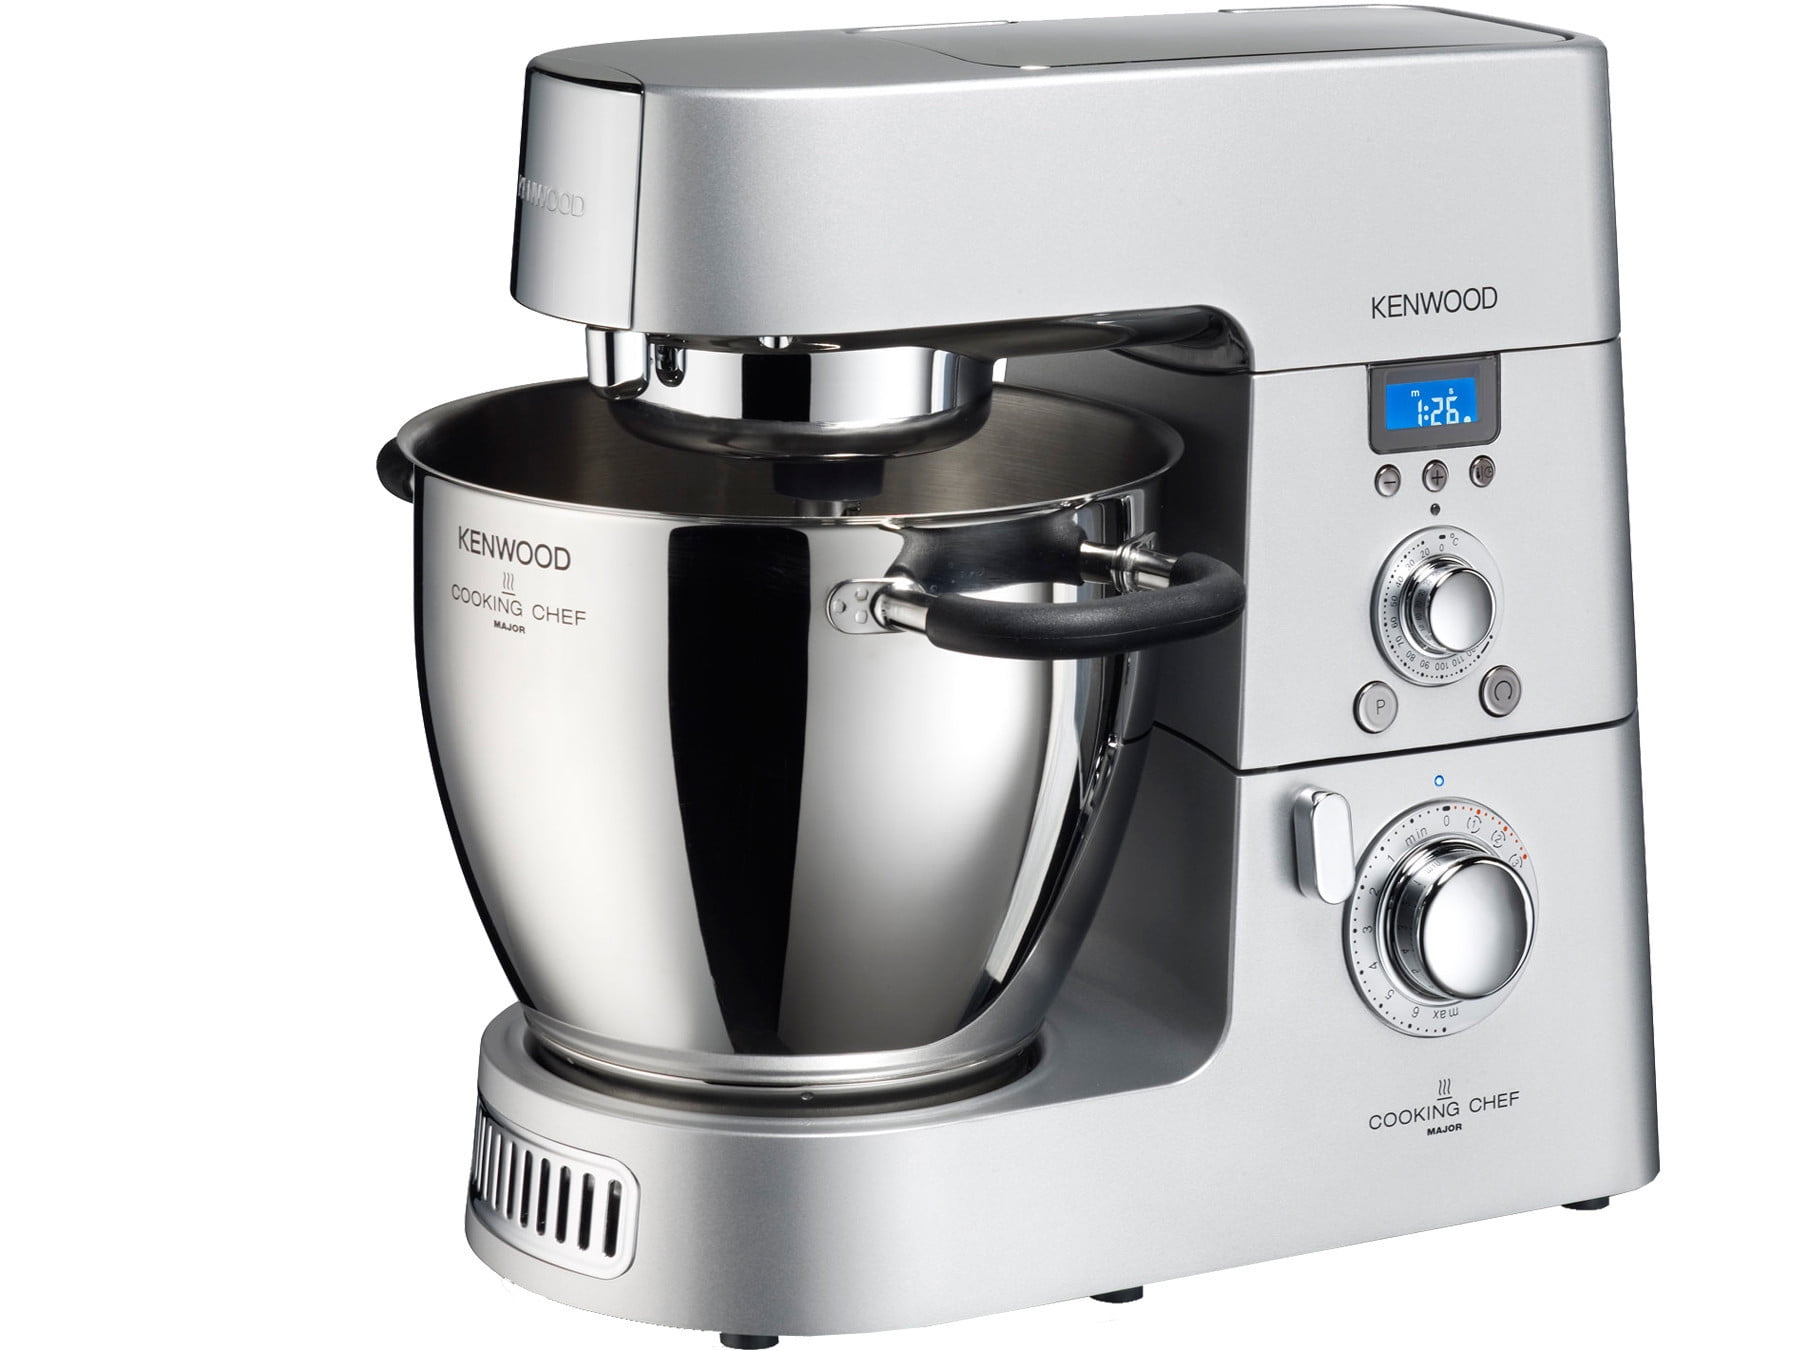 Cooking Chef KM080AT Stand Mixer - Walmart.com